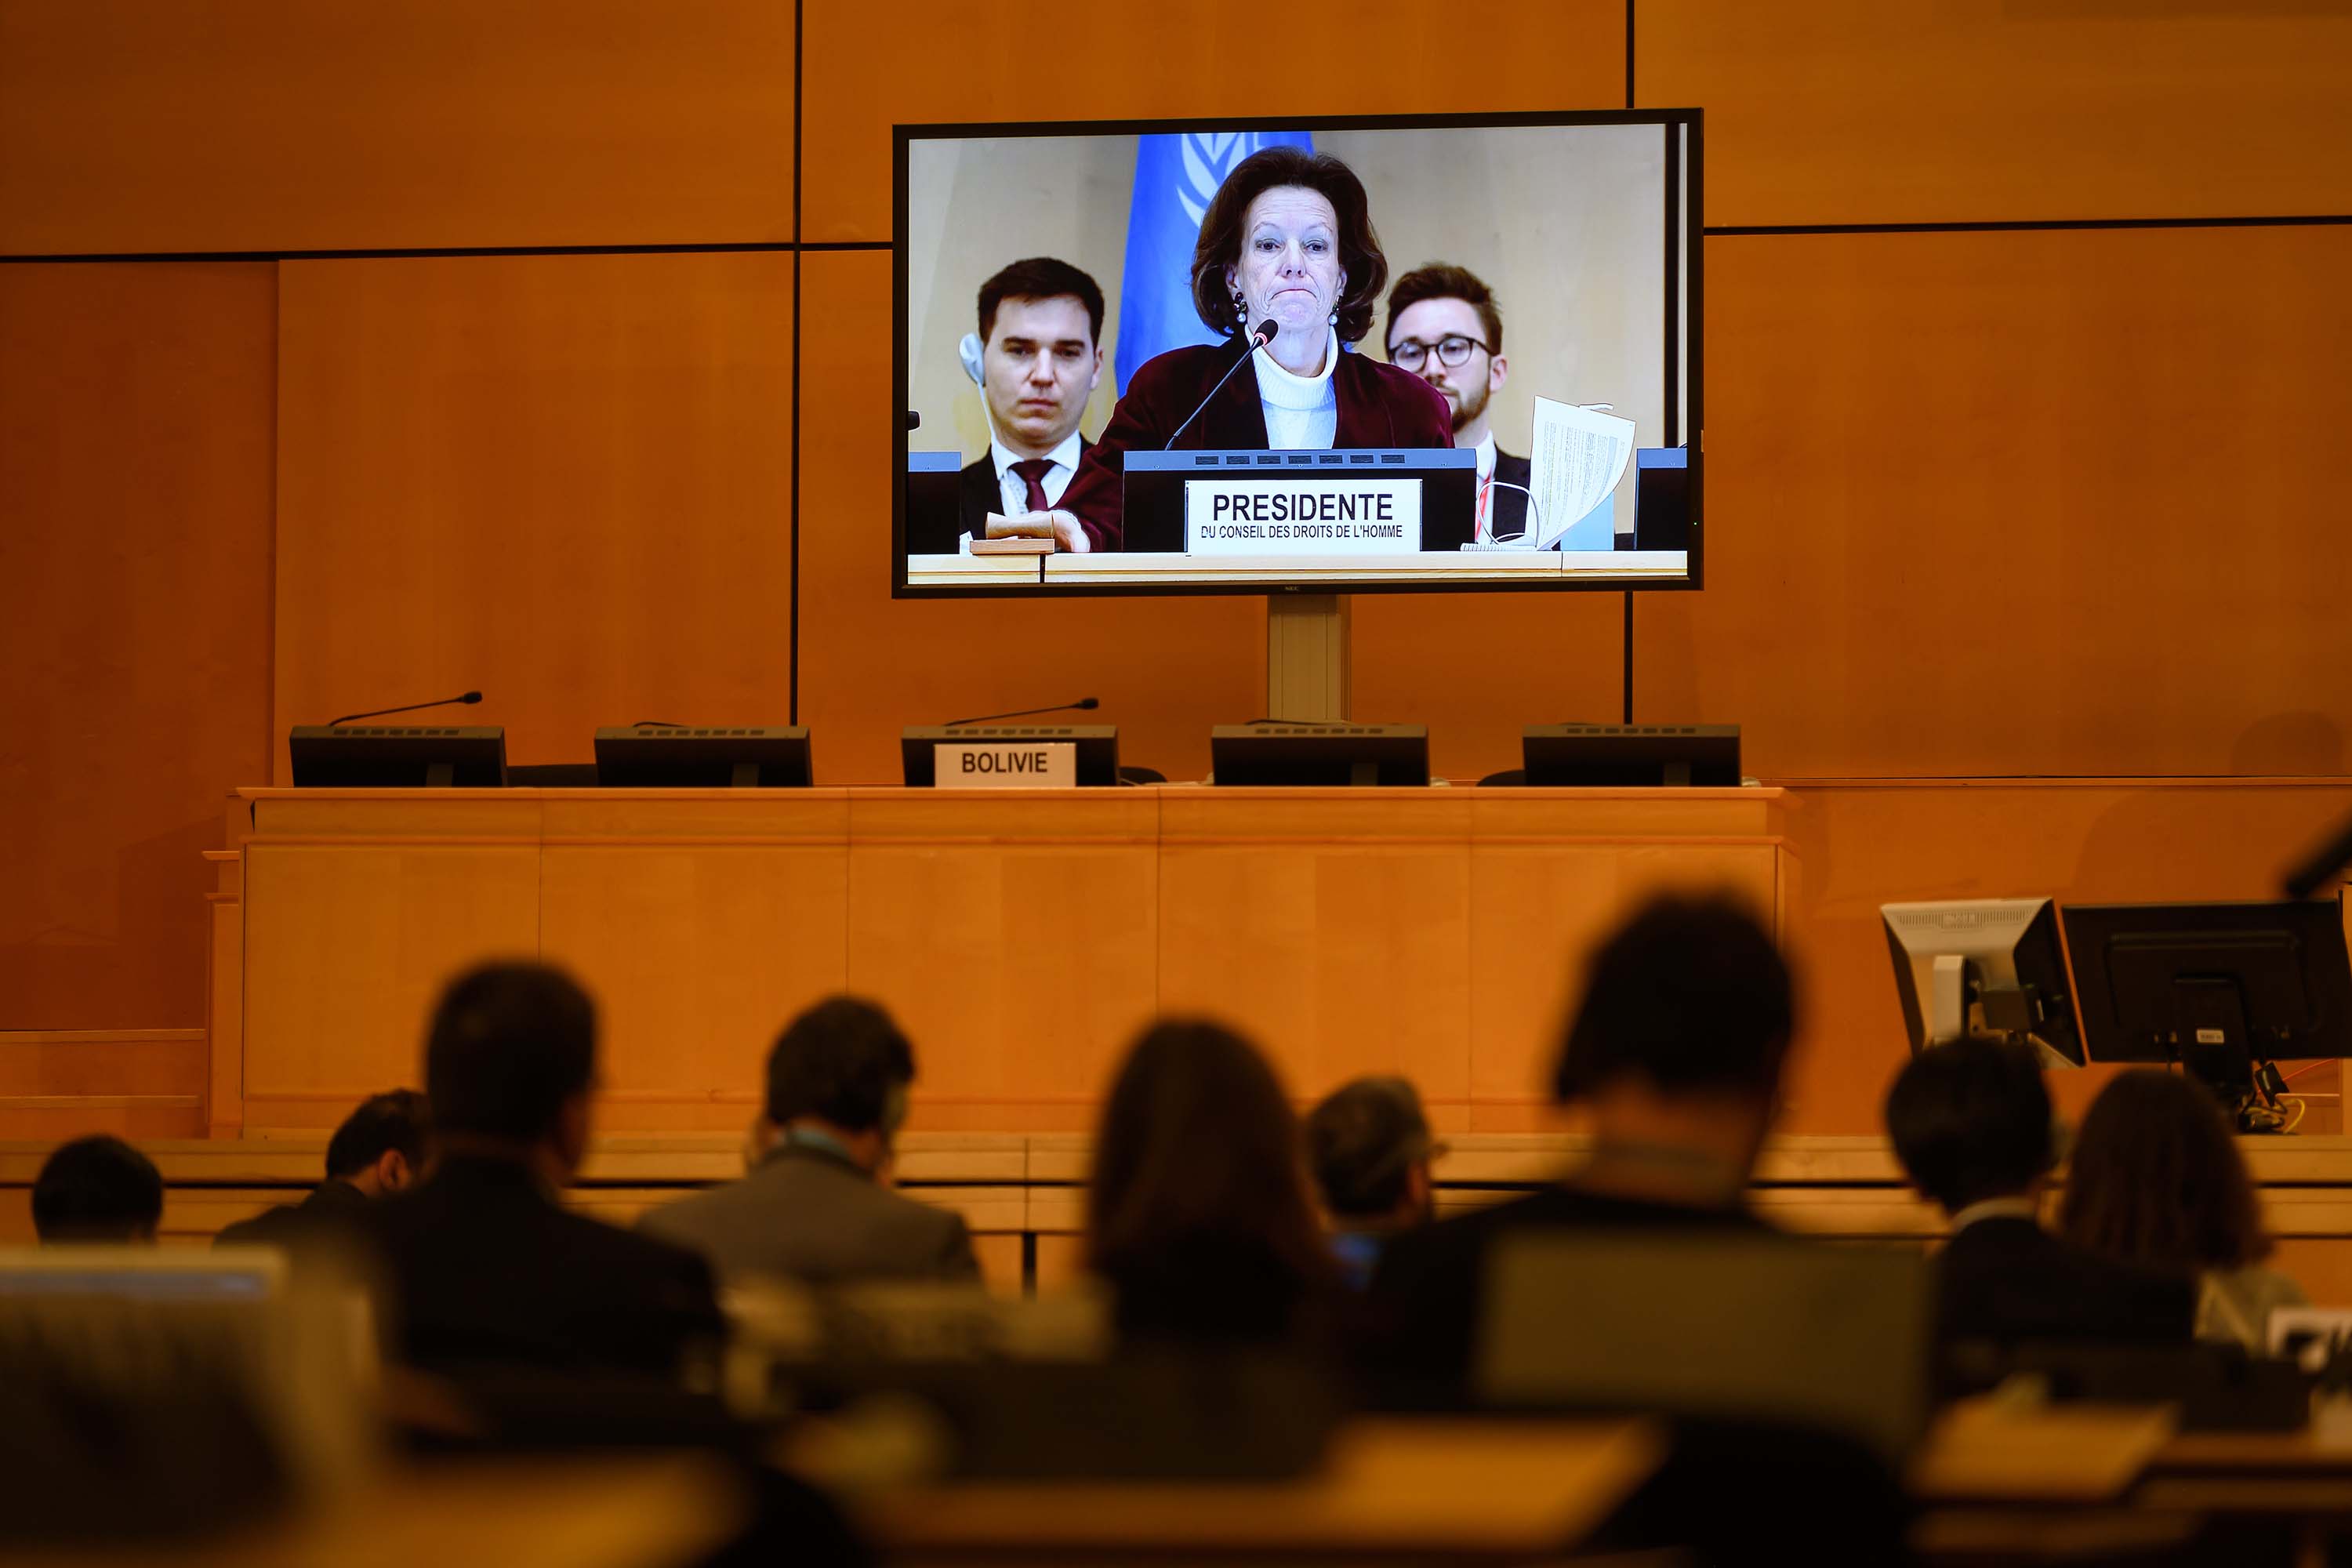 United Nations Human Rights Council President Elisabeth Tichy-Fisslberger is seen on a screen during a session in Geneva, Switzerland, on Thursday.